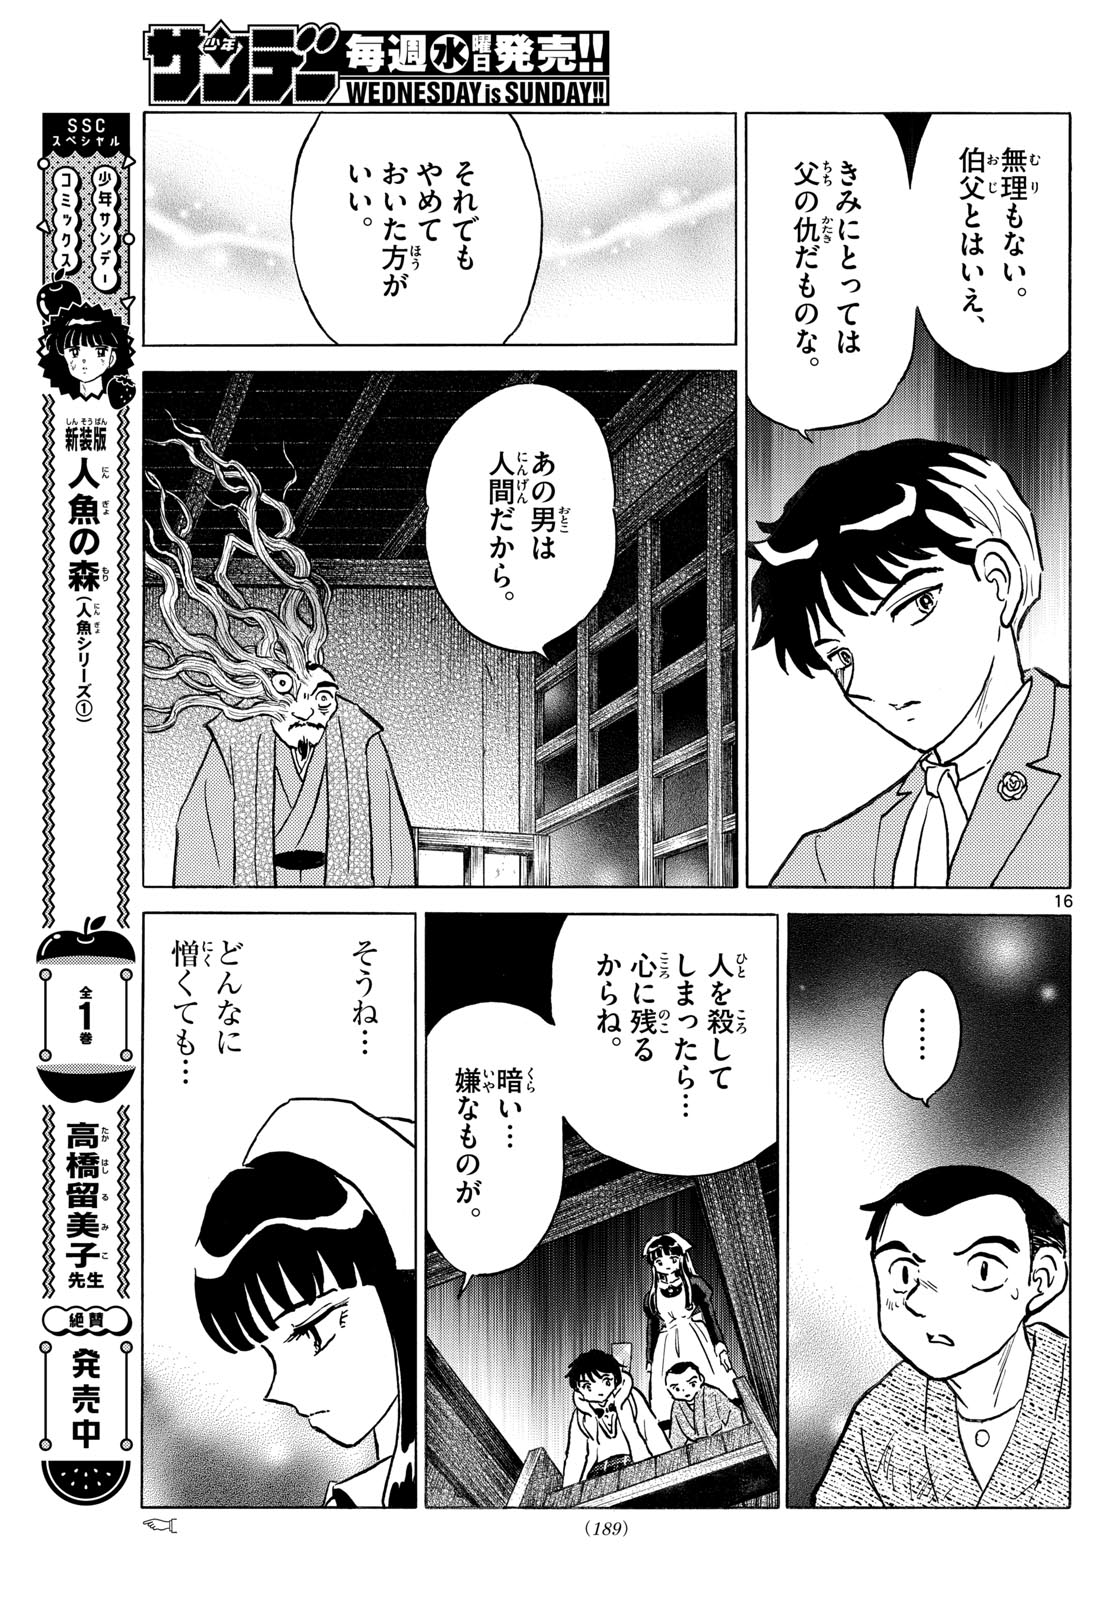 MAO - Chapter 228 - Page 16